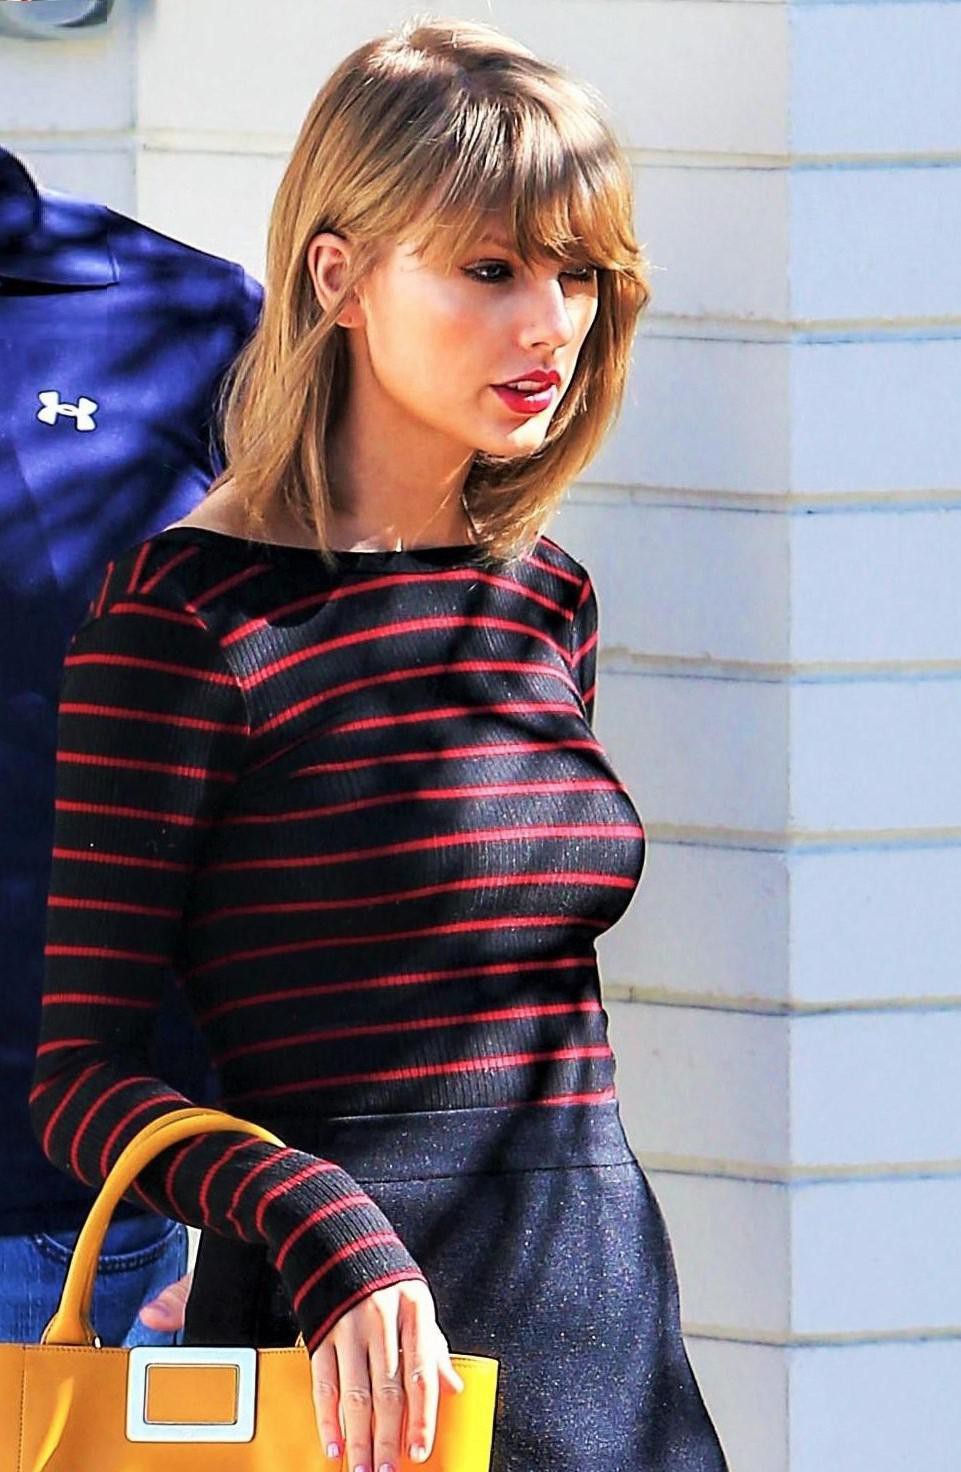 Adorable Taylor Swift Sexy: Celebrity Fashion,  Sexy Girl,  Most Famous Celebrity,  Taylor Swift wallpapers,  Taylor Swift,  Taylor Swift outfit,  Taylor Swift lips  